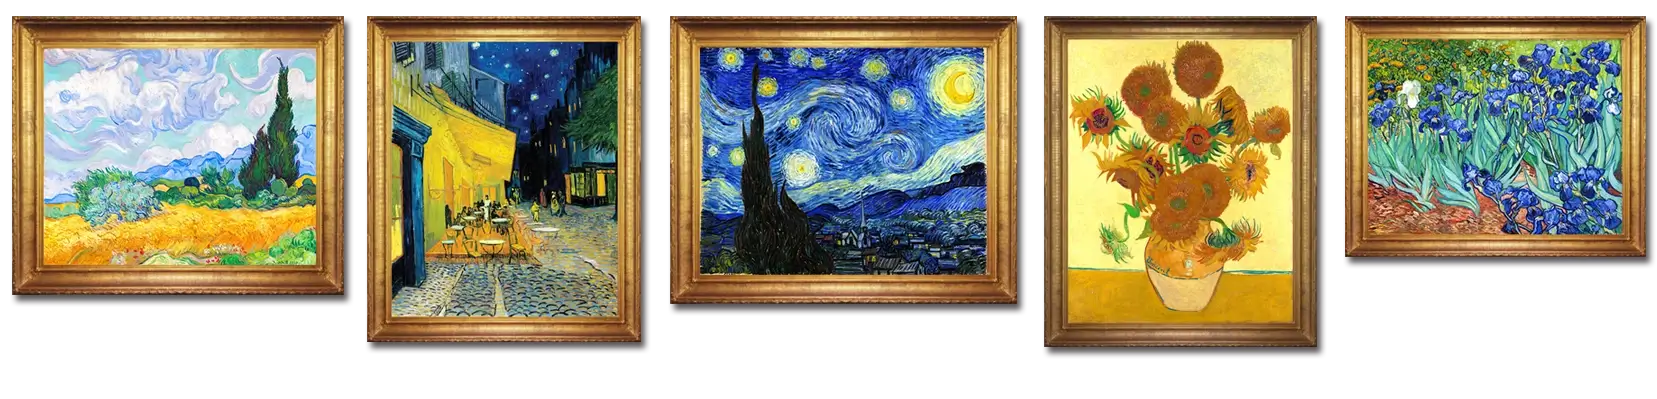 Vincent Van Gogh - Museum quality handmade oil painting reproductions